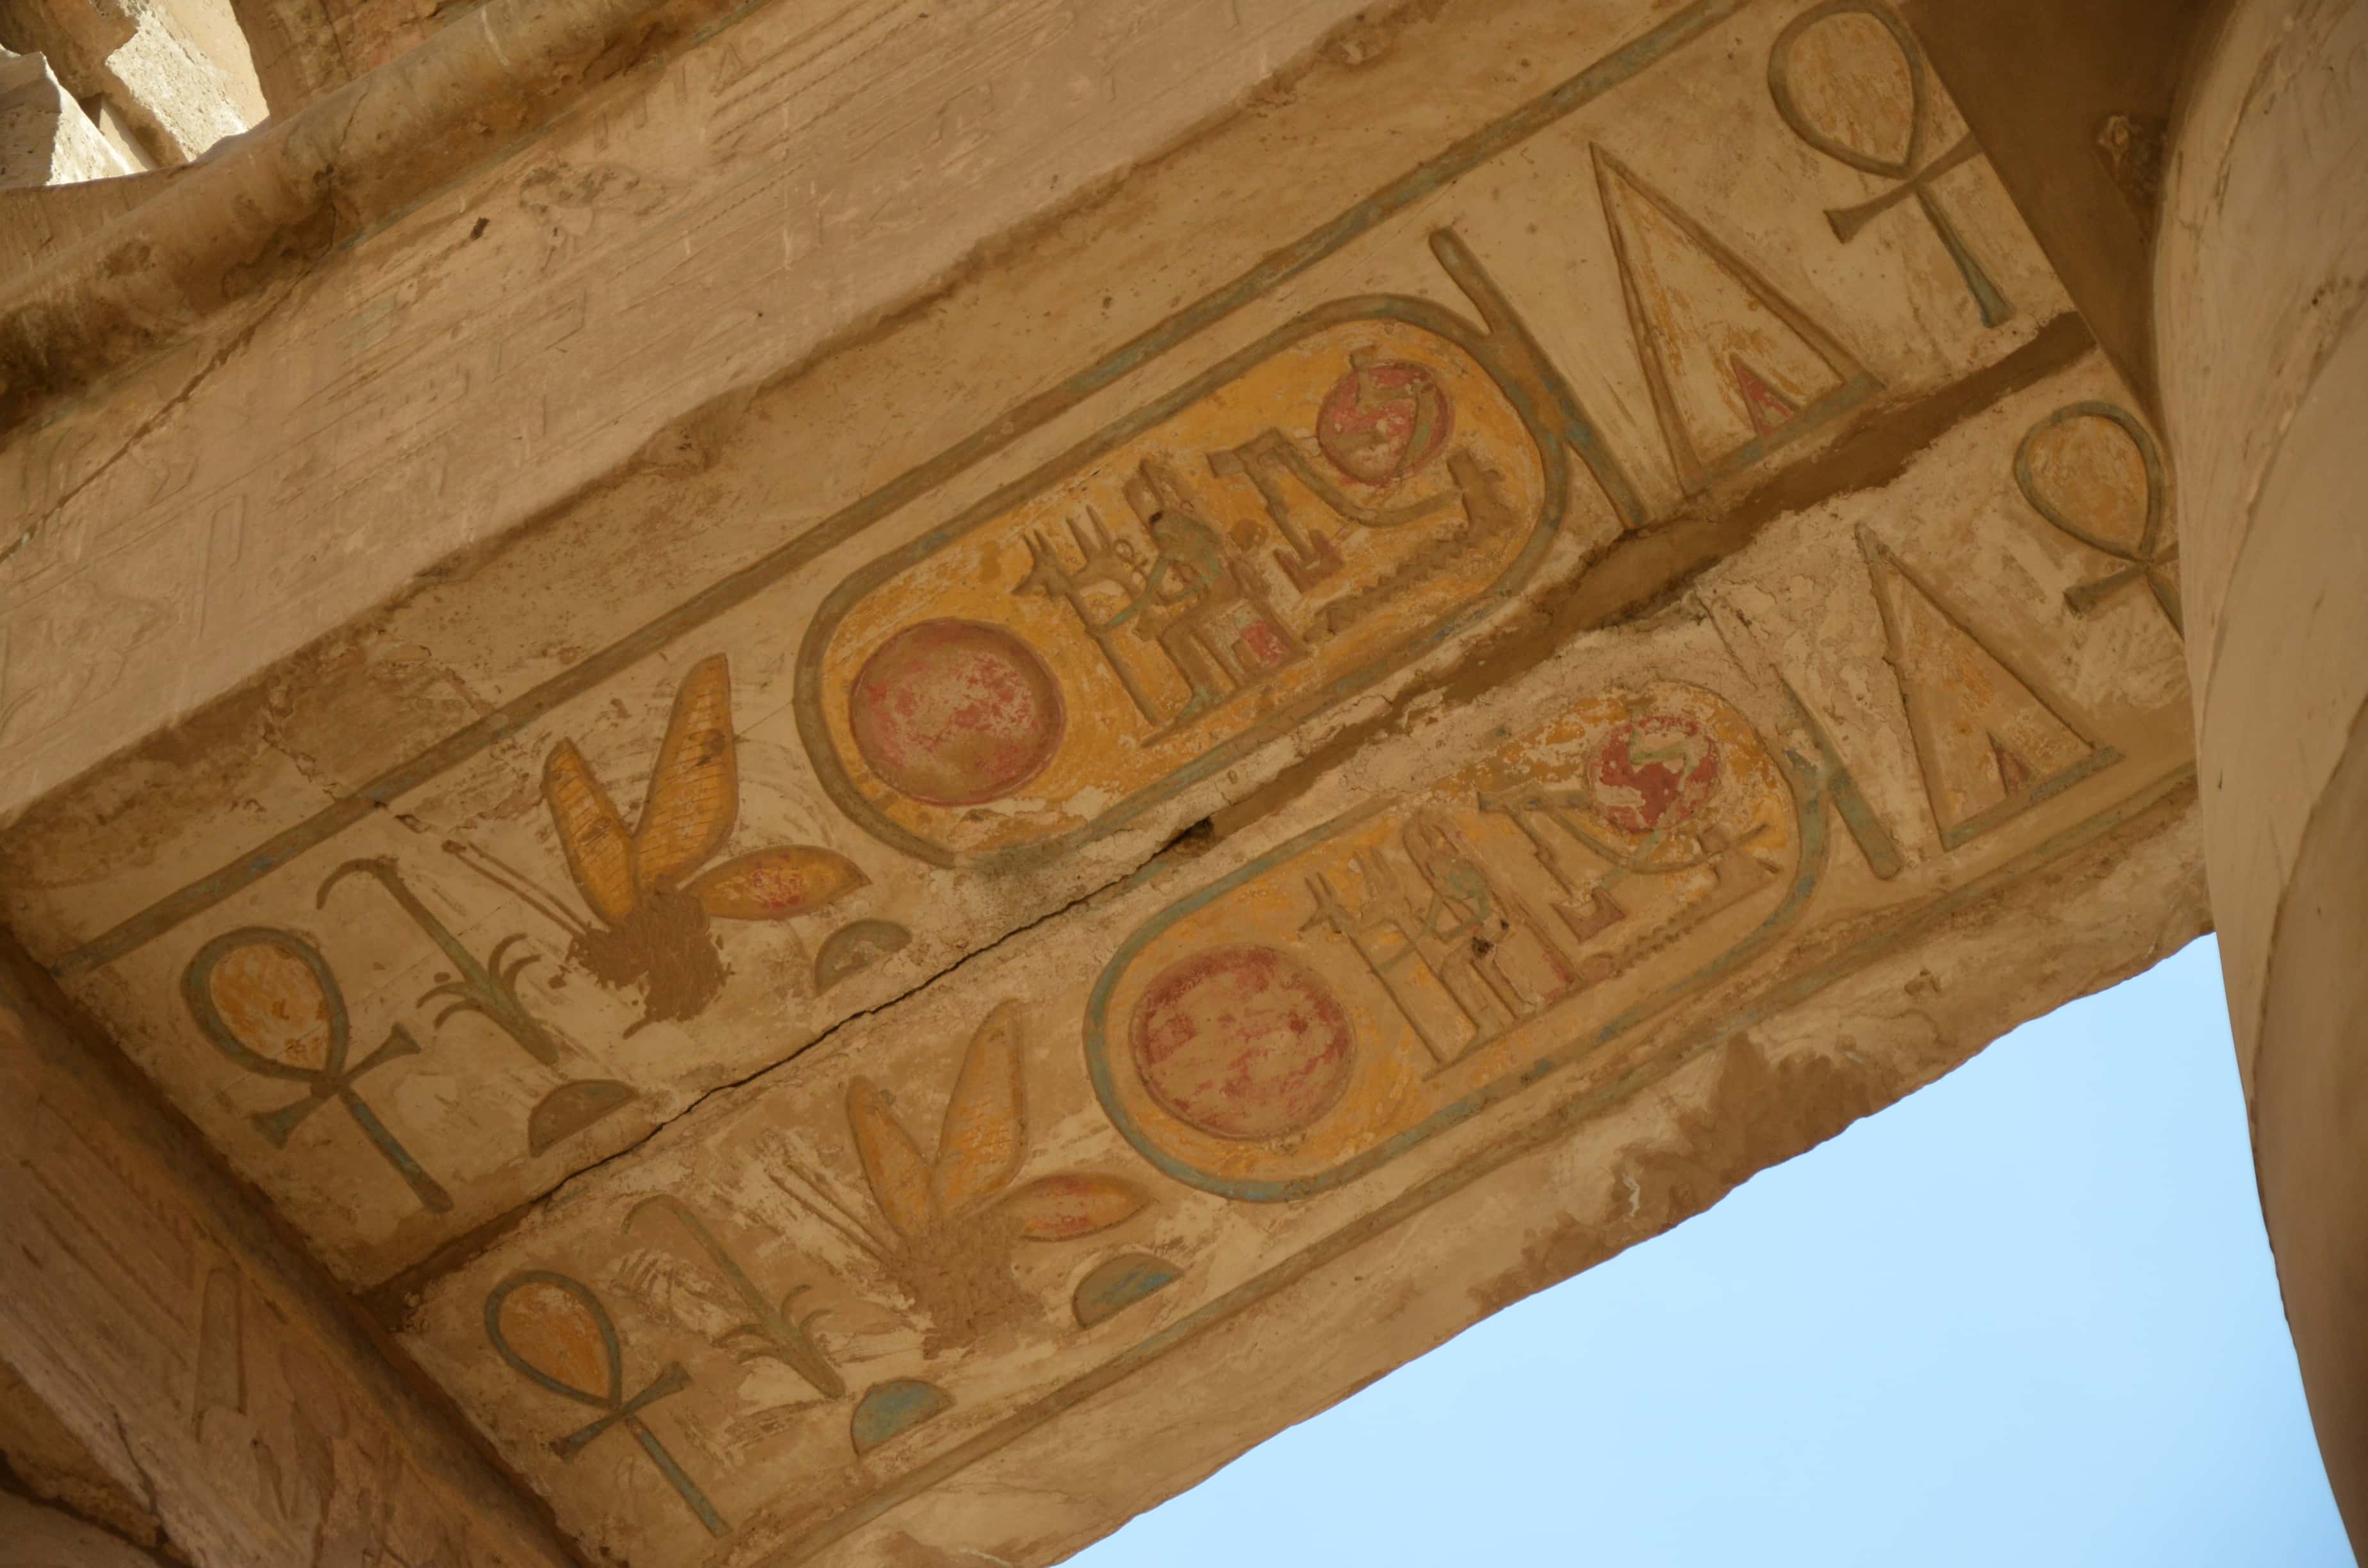 Hieroglyphics in the Hypostyle Hall